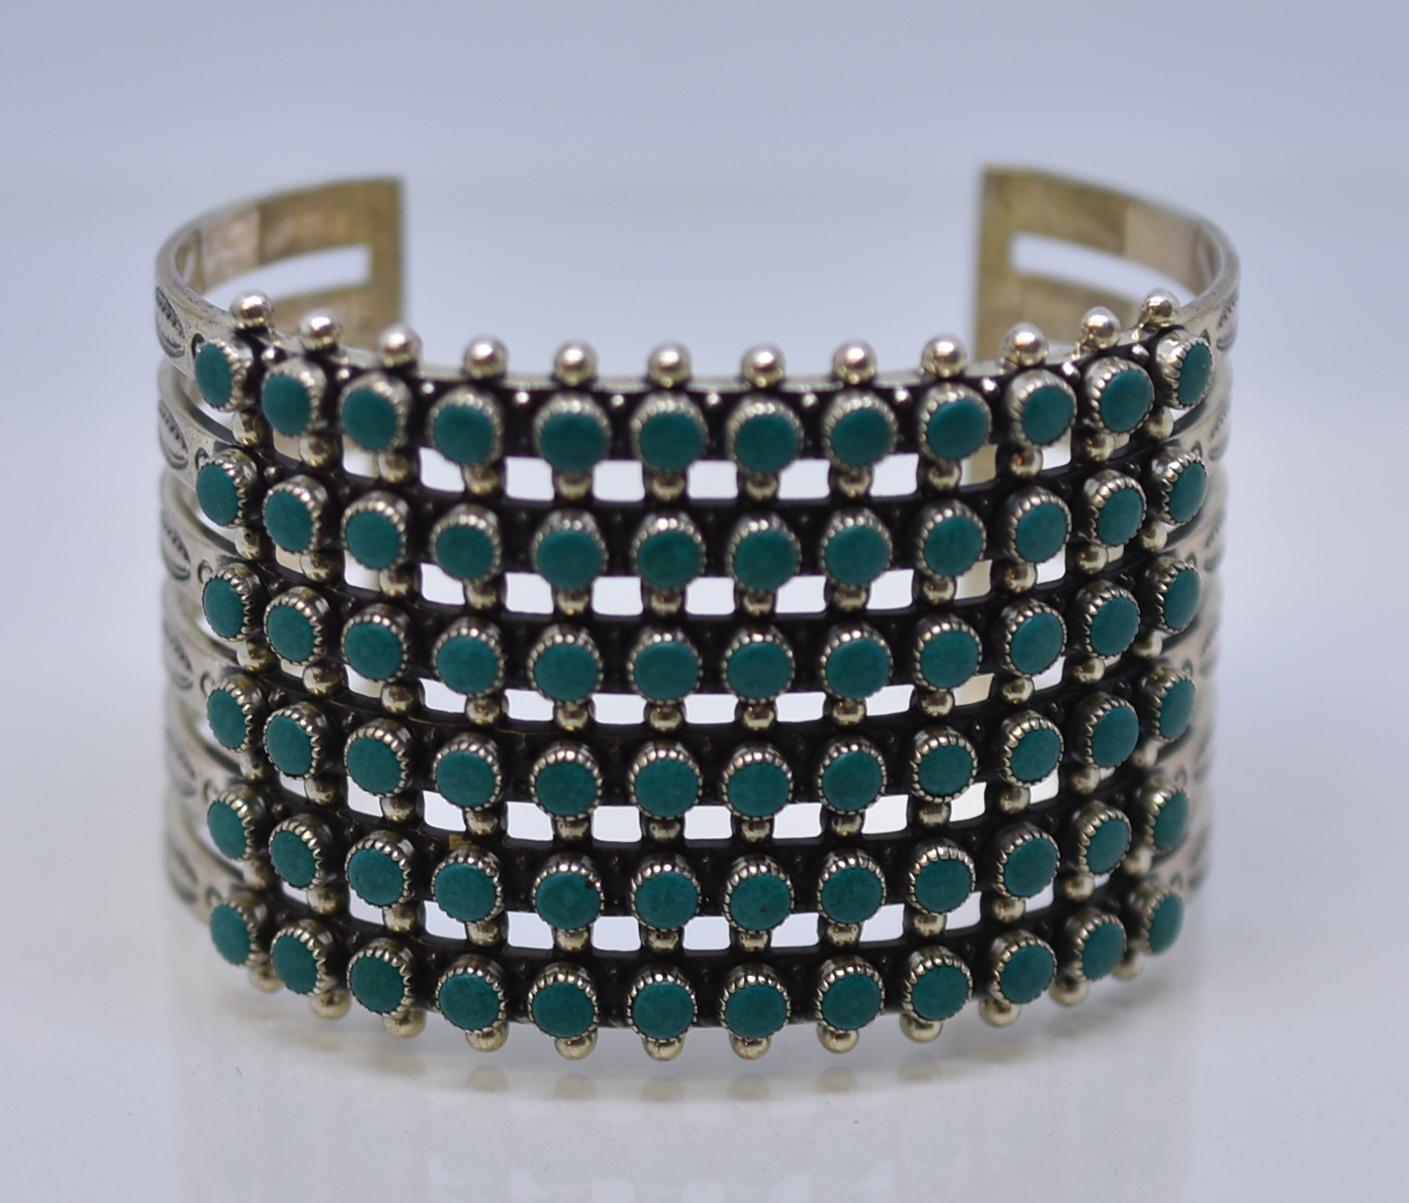 Lovely vintage Zuni 6-row cuff bracelet turquoise decorated with a ‘snake eye’ pattern. The round stones are set in serrated bezels and separated between the rows and on the top and bottom edges with small silver balls. The ends of the bracelet are